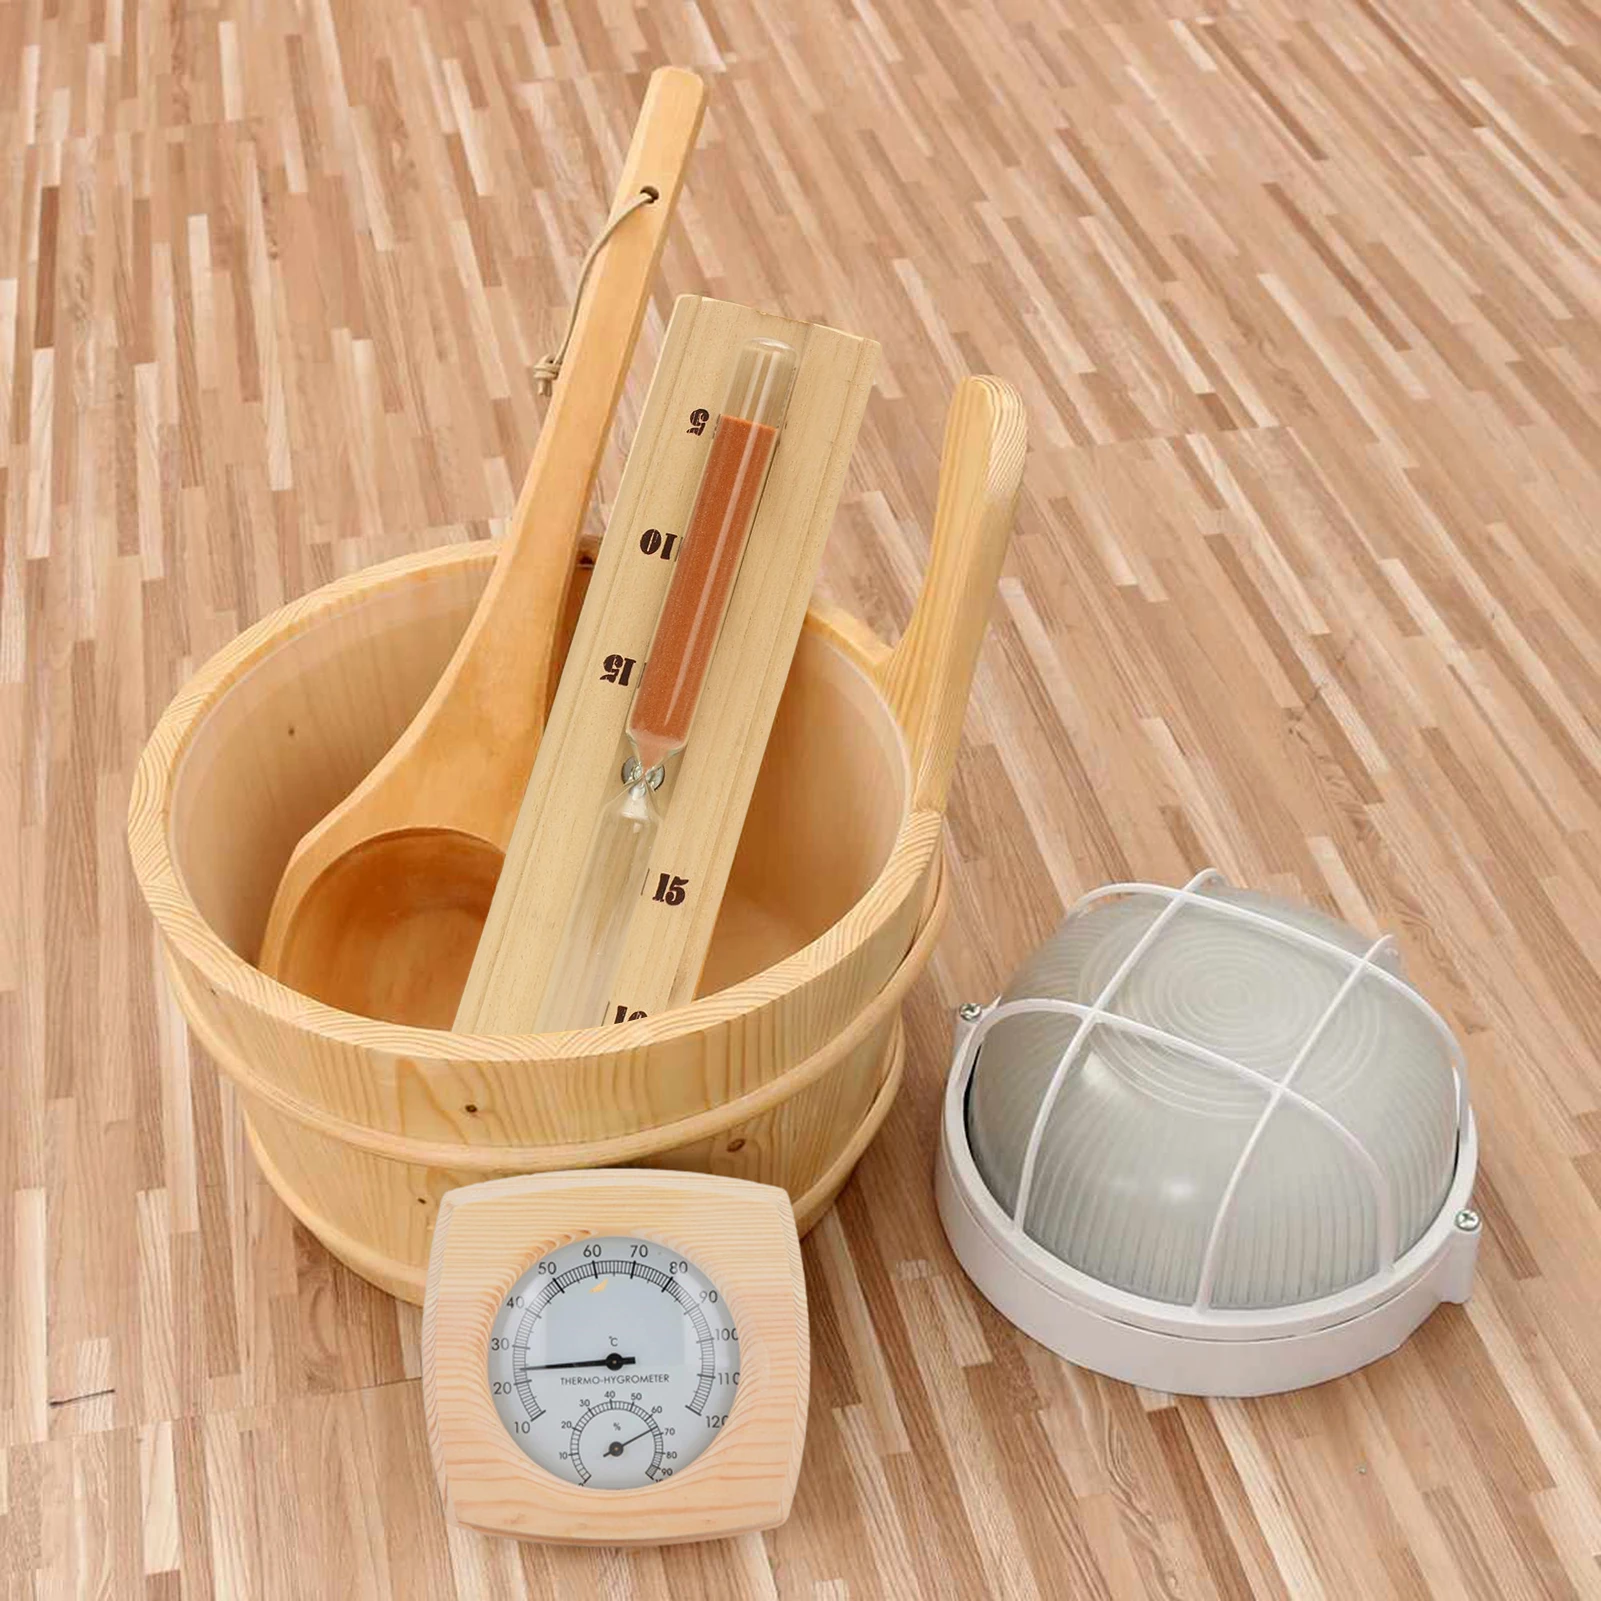 

Wooden Sauna Bucket With Bucket,Spoon,Hourglass,Thermometer And Hygrometer, Lampshade,Essential Spa Accessory For Steams Room